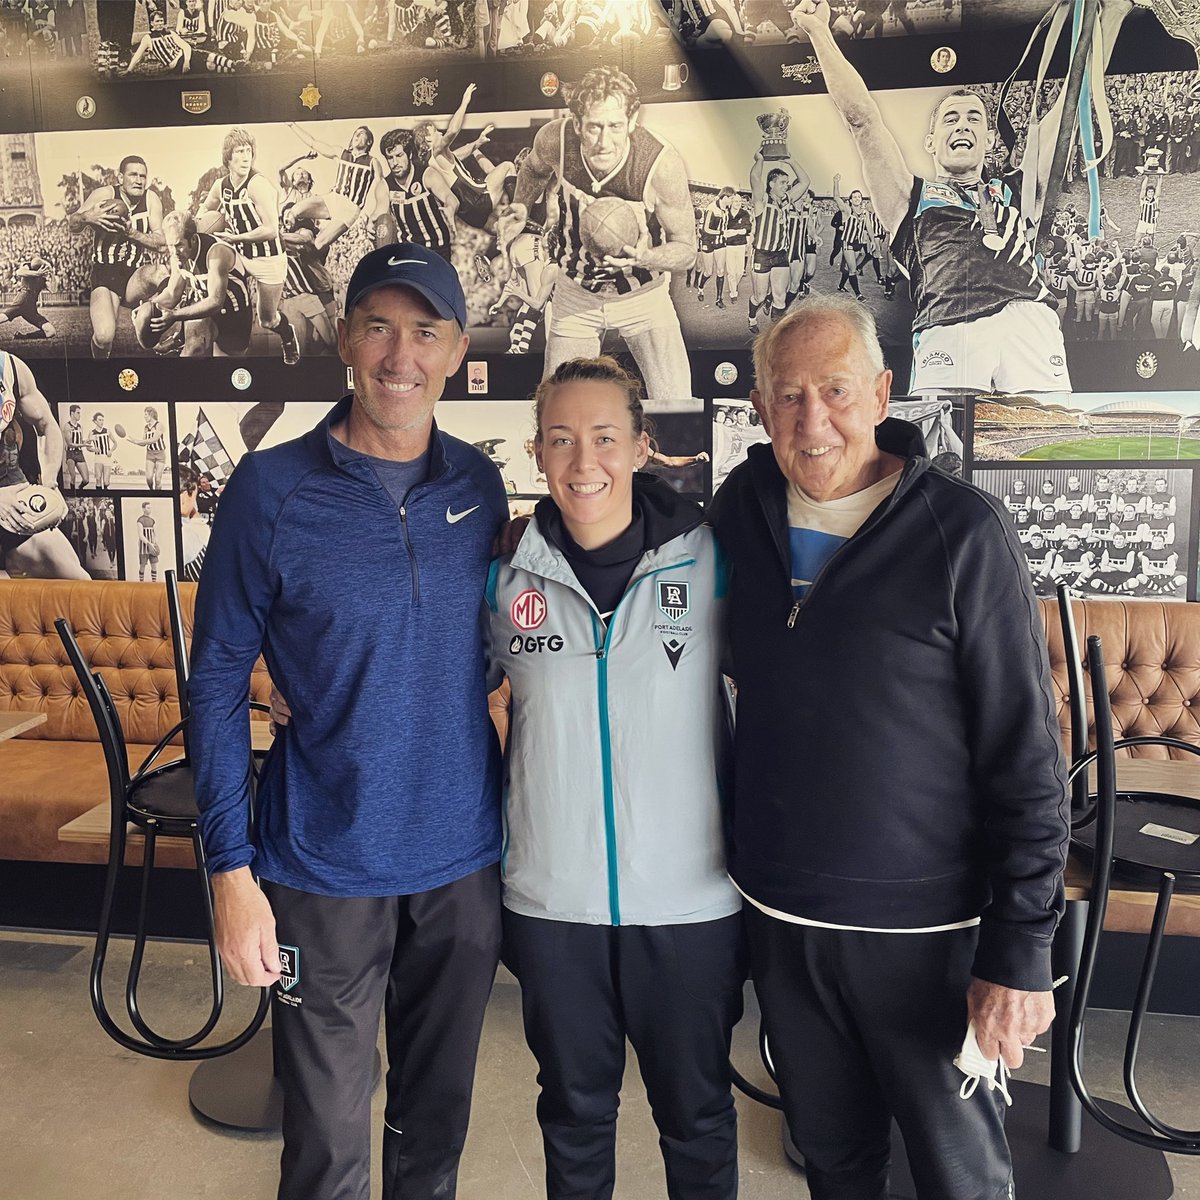 Great morning talking footy and coaching with our @pafc_w coach, @Larnell13 and @jvcahill40 Recognize the dude right behind Lauren? 🙃 #ThePrecinct #weareportadelaide⚫️⚪️🔵 @mrichoPAFC